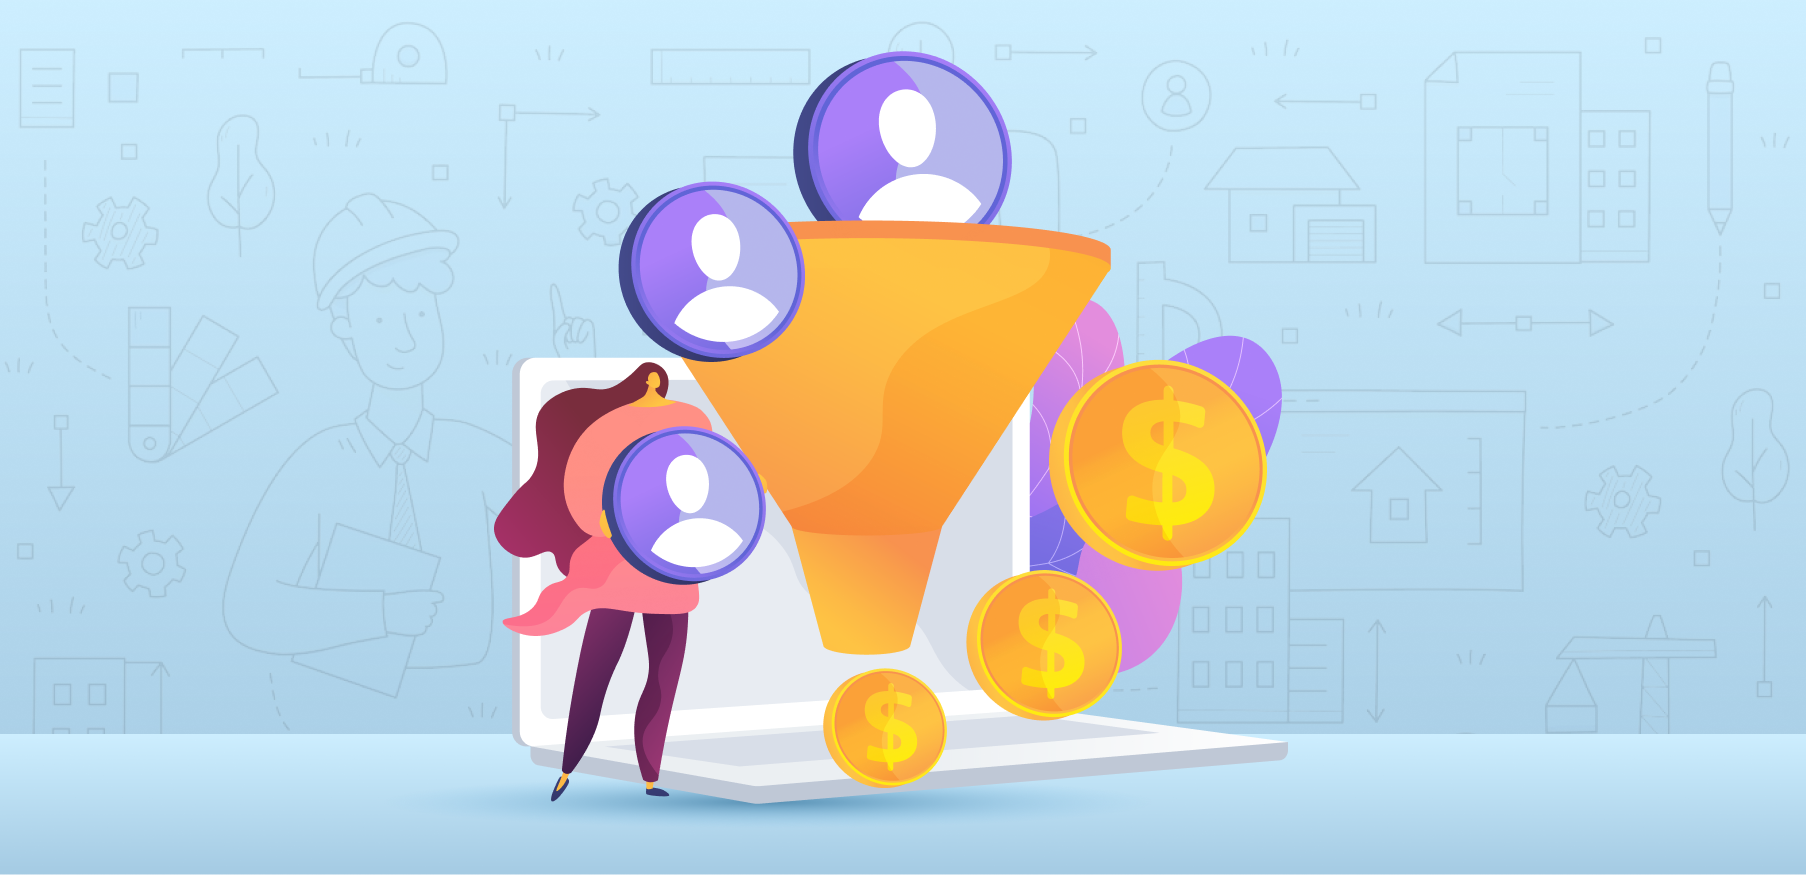 Analyze and Improve Your Sales Funnel - AiTrillion